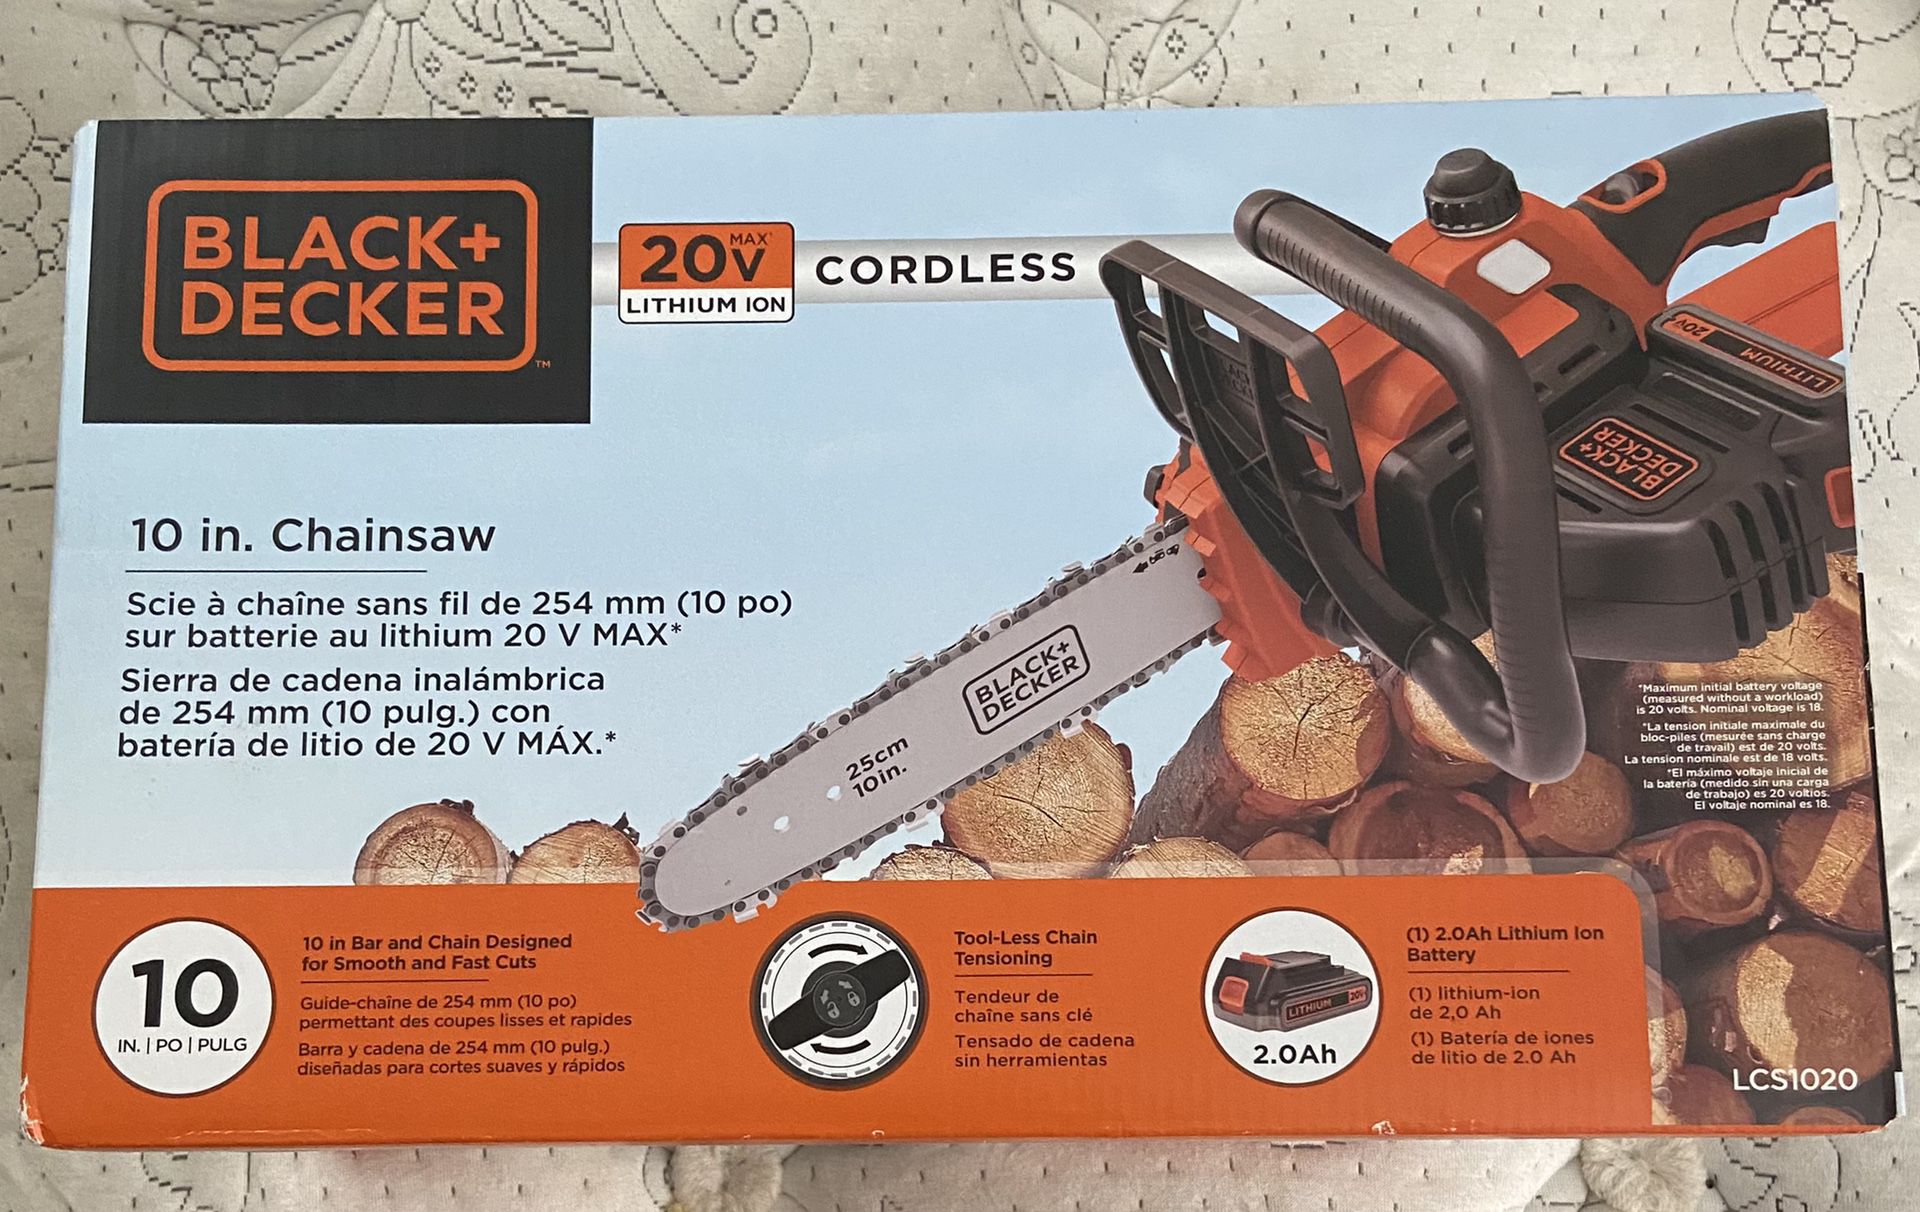 Black and Decker 20v cordless electric chainsaw